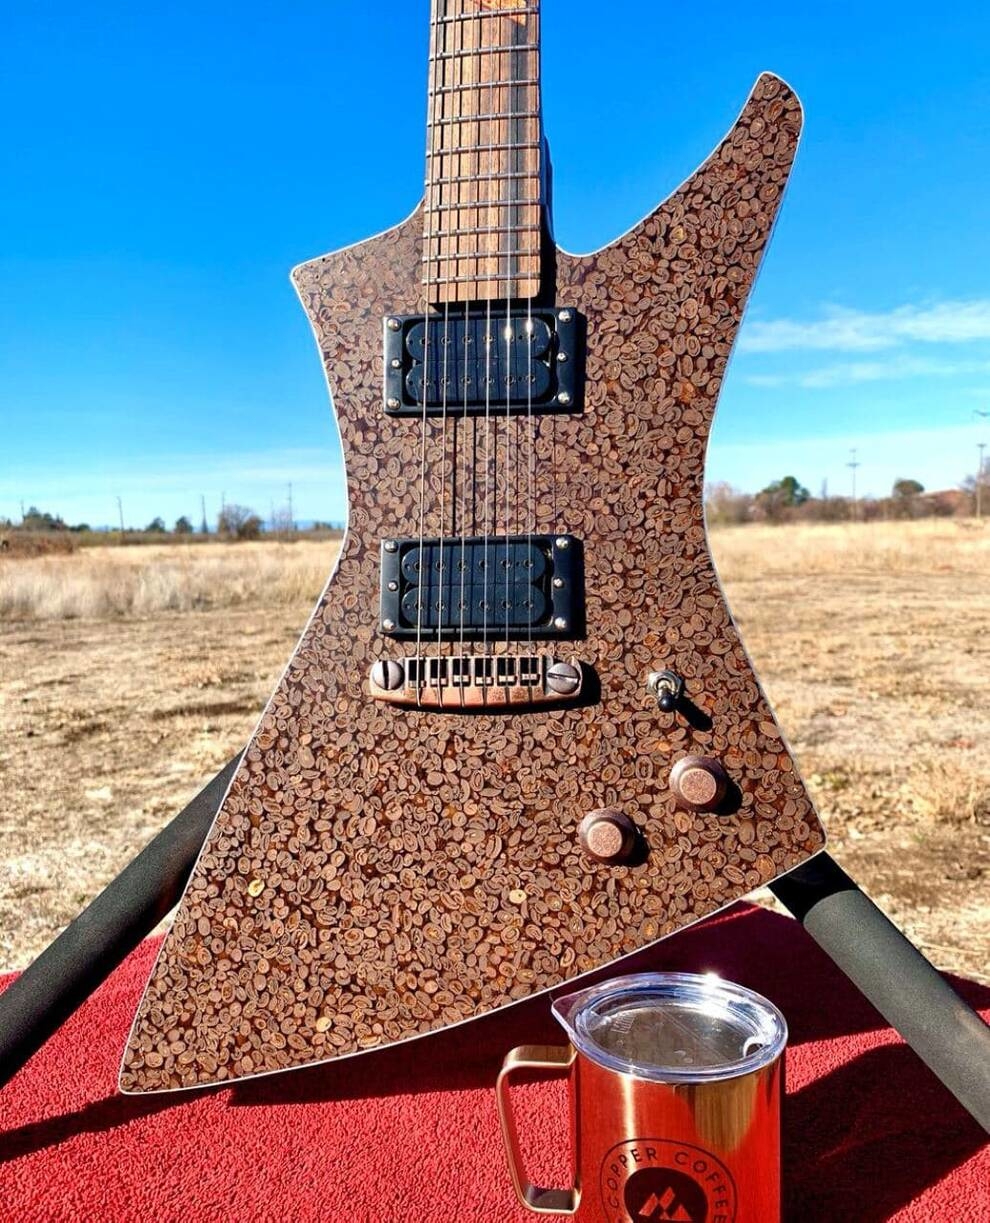 Electric guitar made from coffee beans: a blogger created an unusual musical instrument